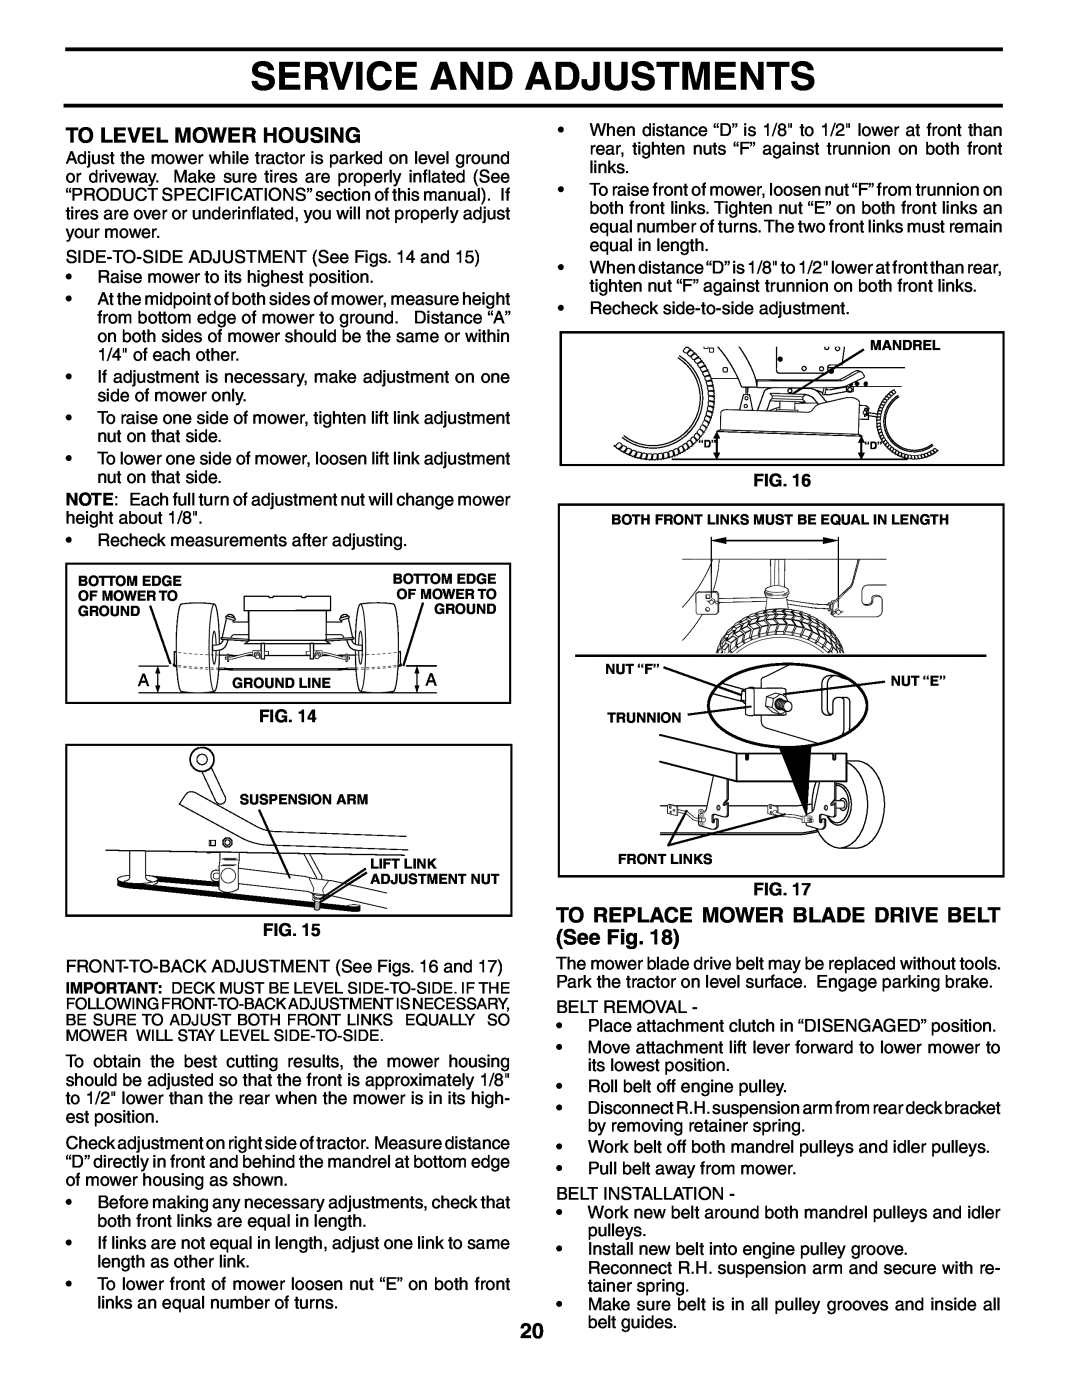 Weed Eater 195383 manual To Level Mower Housing, TO REPLACE MOWER BLADE DRIVE BELT See Fig, Service And Adjustments 